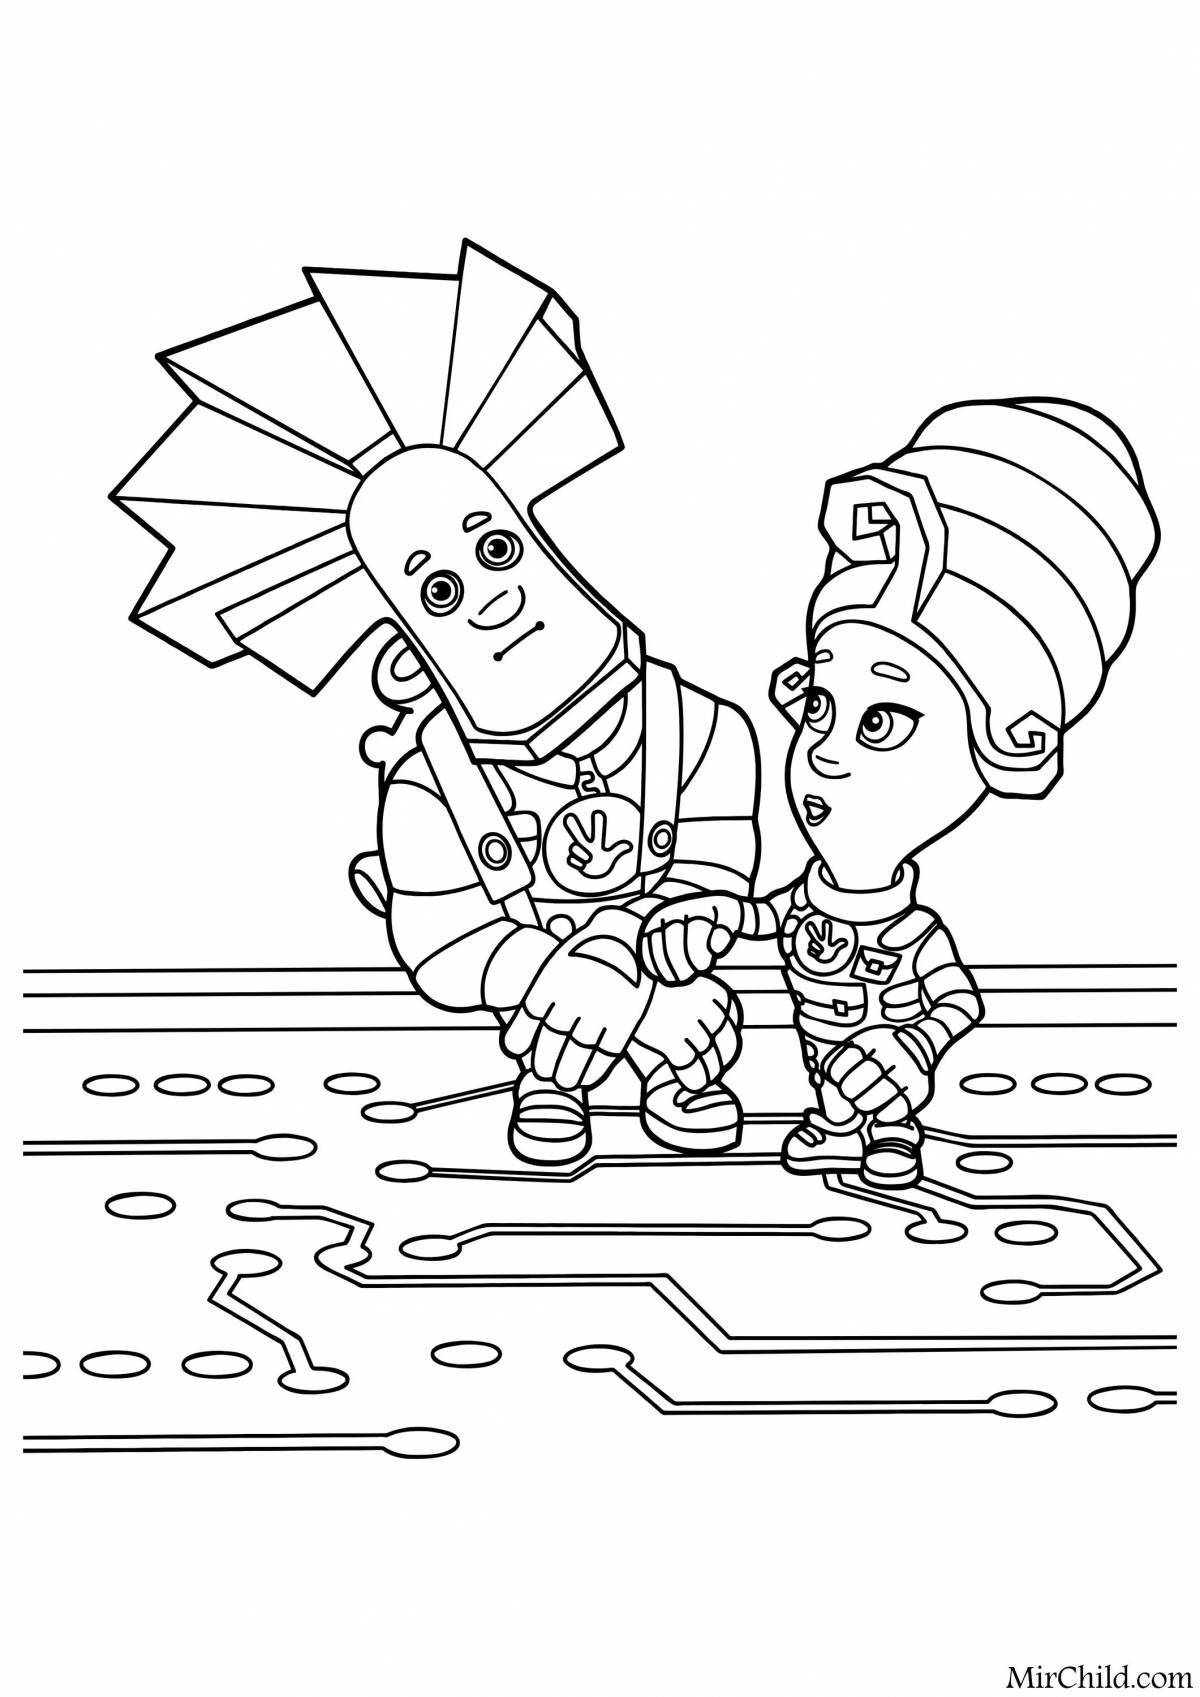 Coloring page playful papus